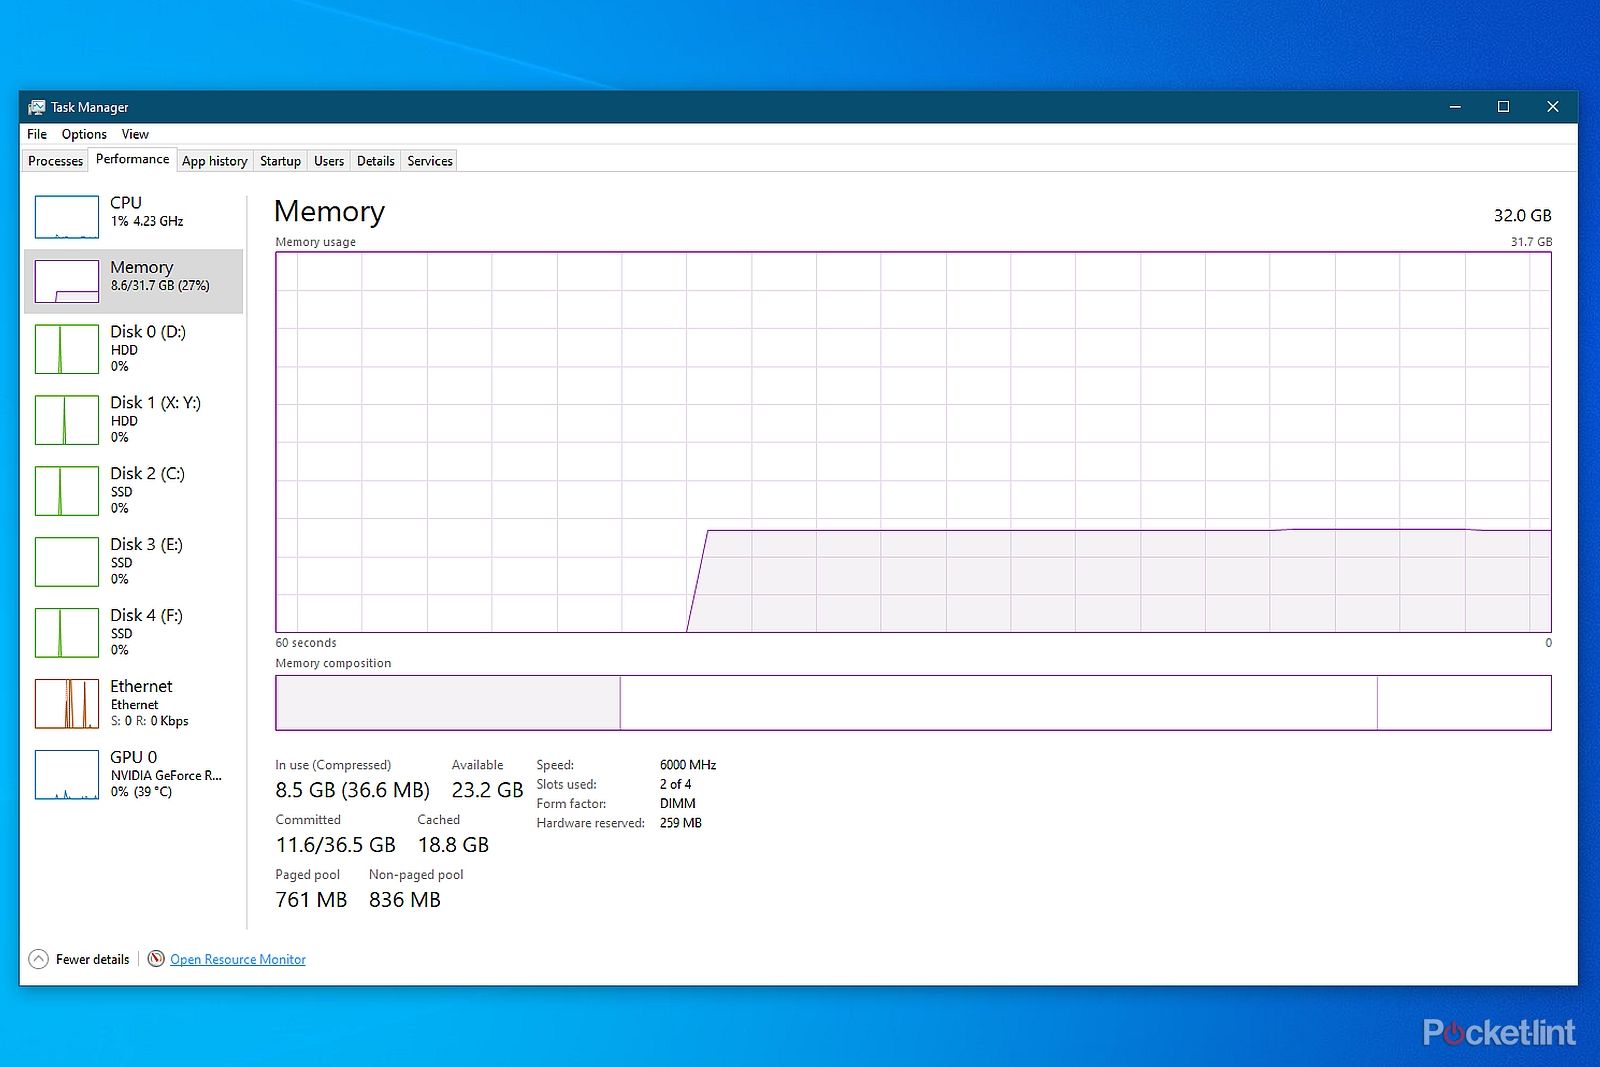 task-manager-memory